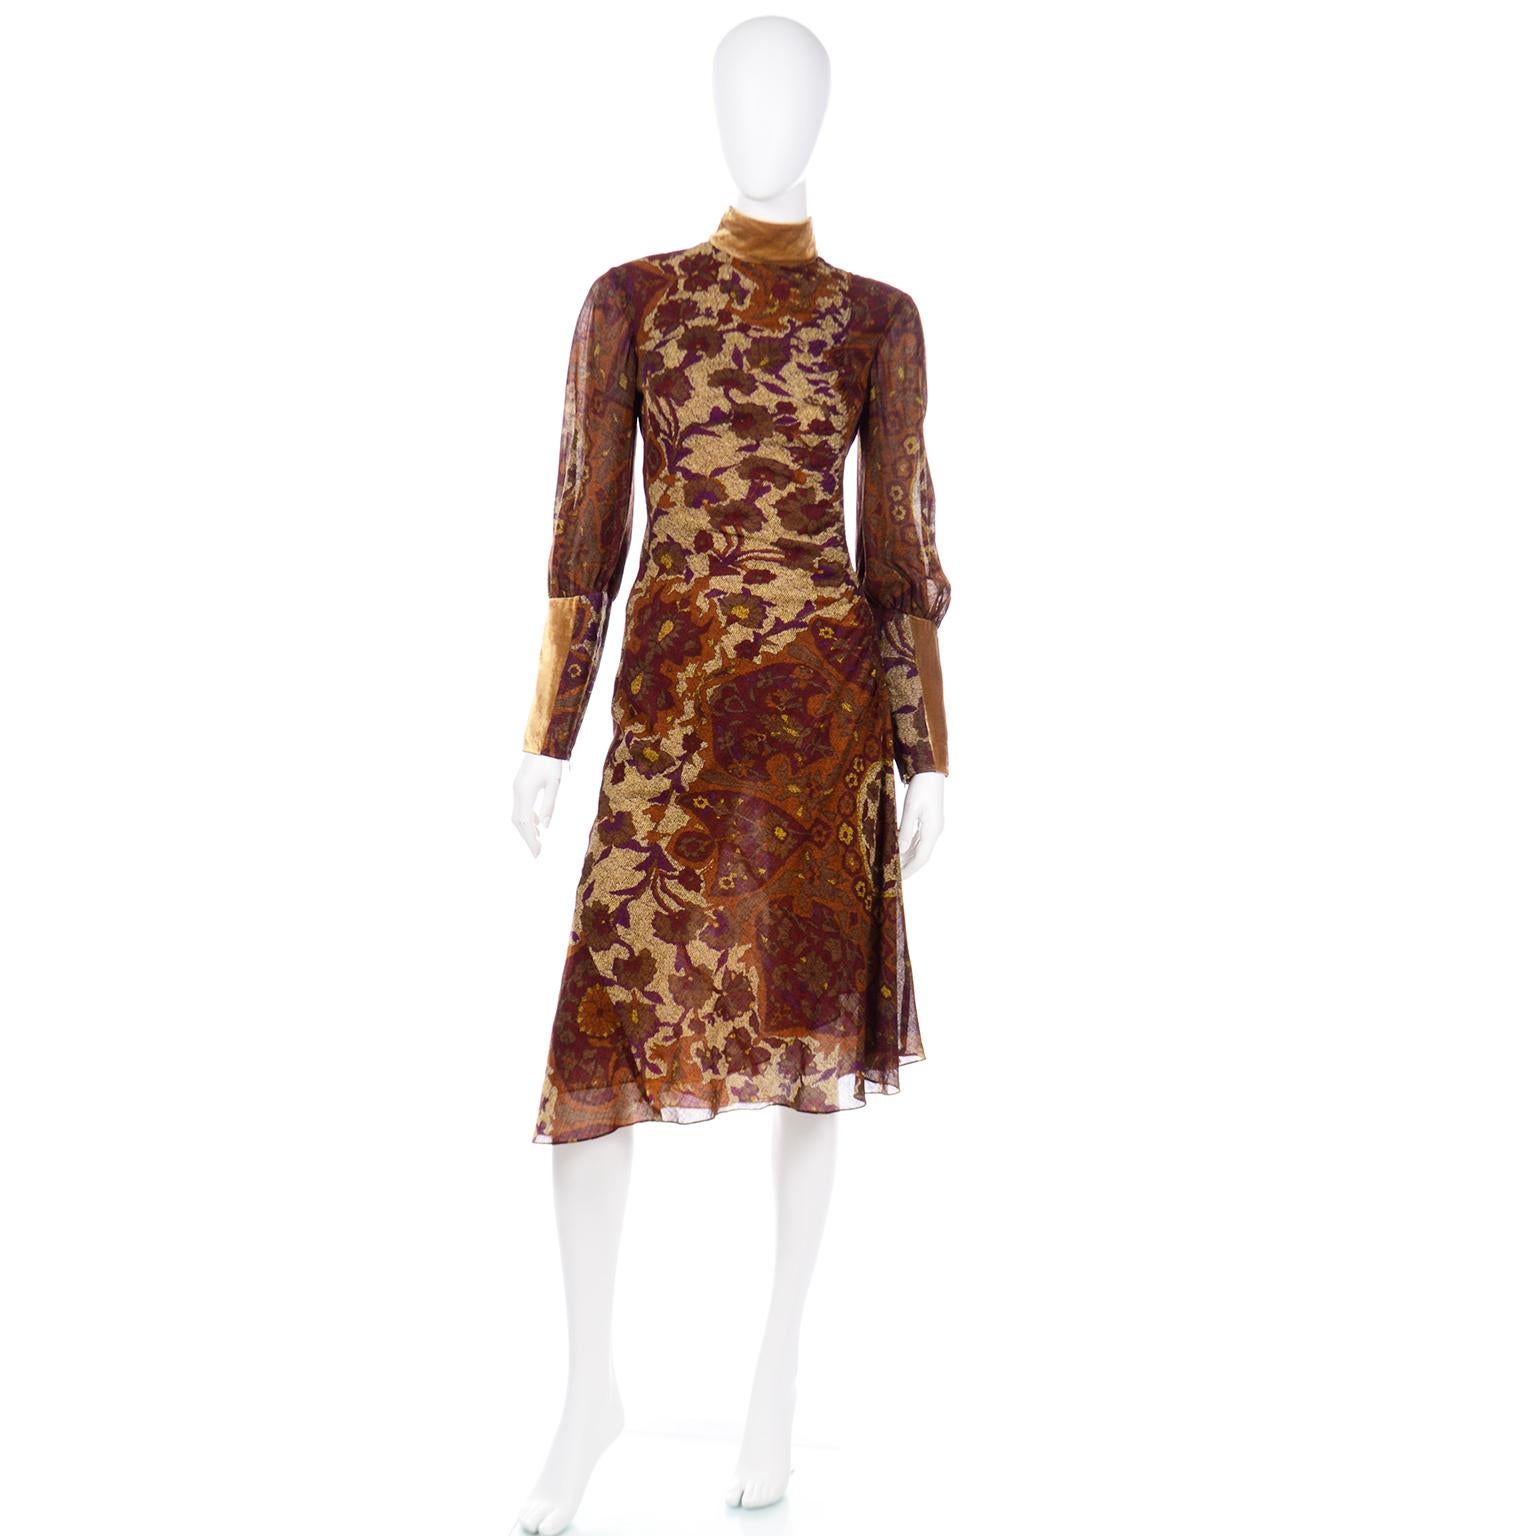 This gorgeous vintage Kenzo dress is in an abstract floral print in rich shades of plum, soft gold, copper and brown with gold velvet trim at the collar and cuffs. The semi sheer fabric is lined in gold organza. One side has ruching and the dress